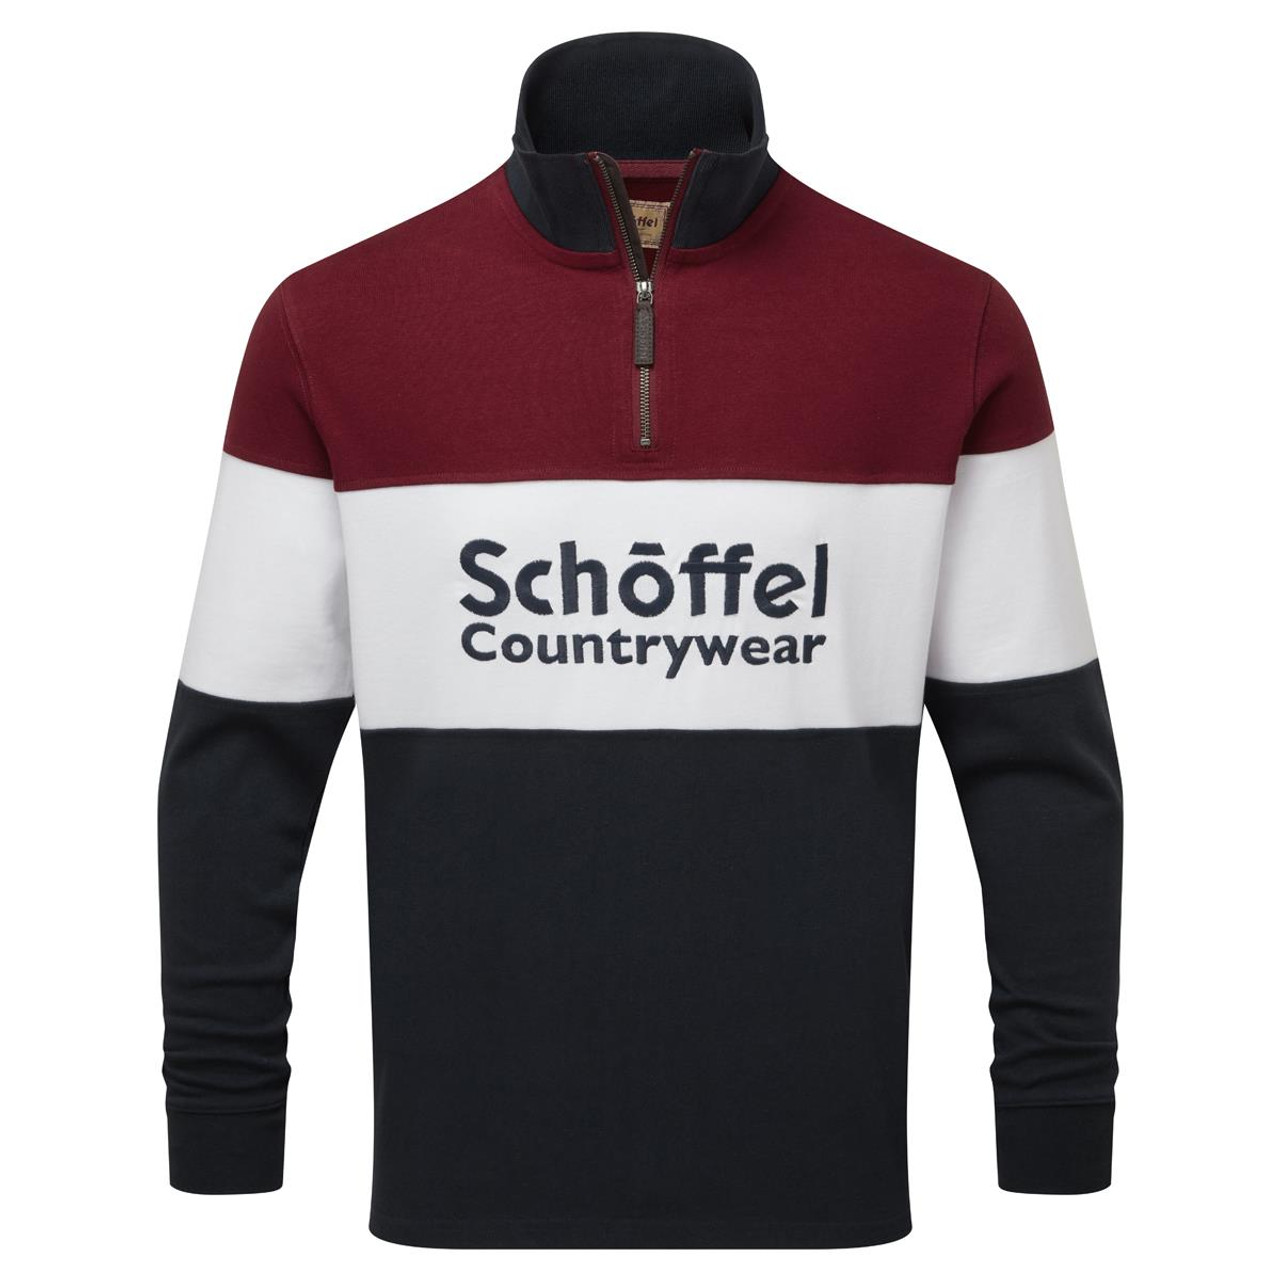 What are some great pairings for the Schoffel Exeter 1/4 Zip Unisex?